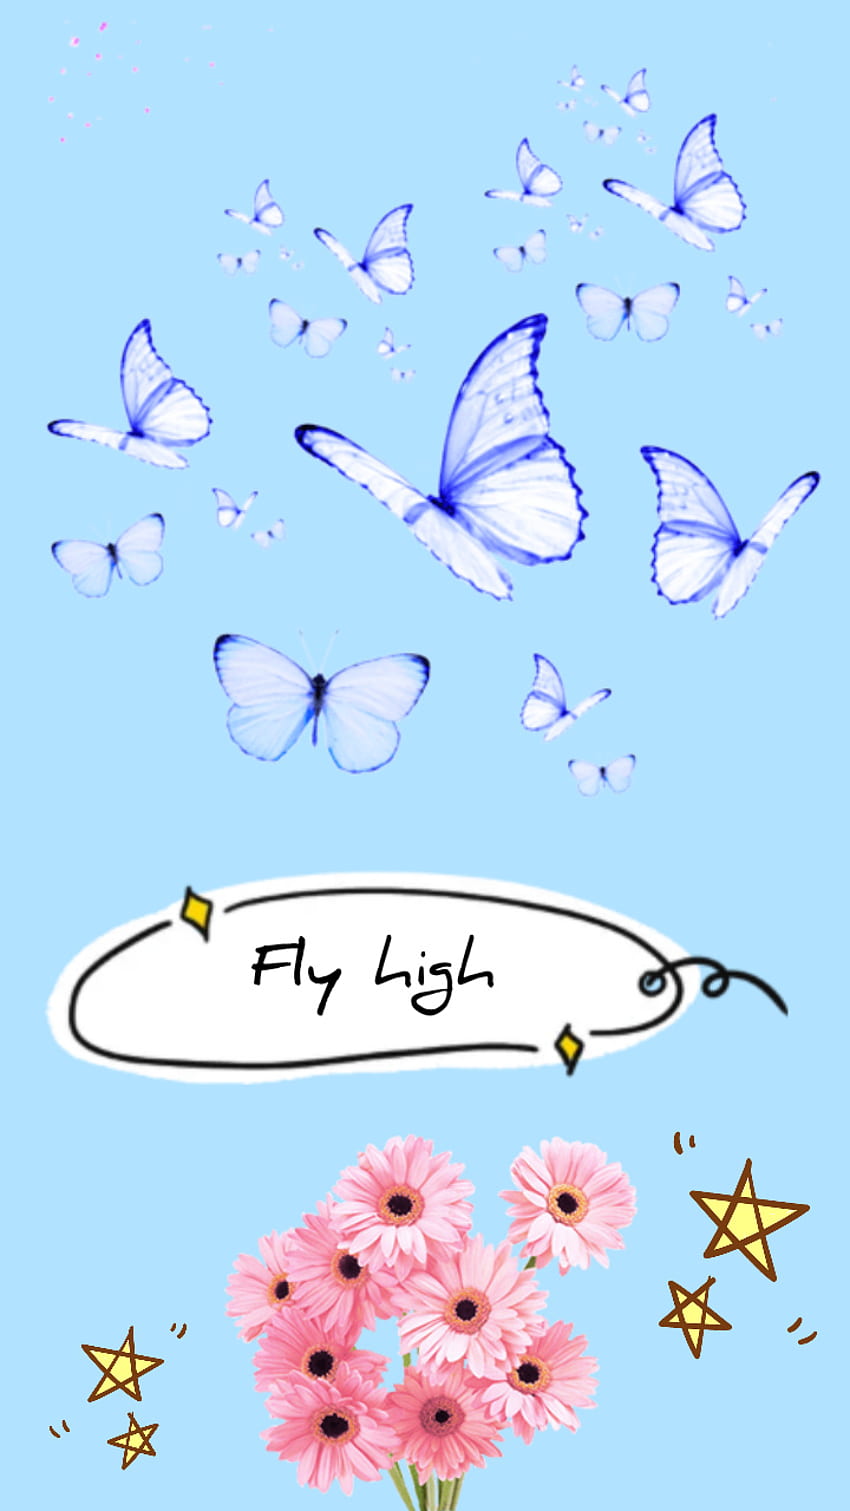 HD fly high wallpapers  Peakpx